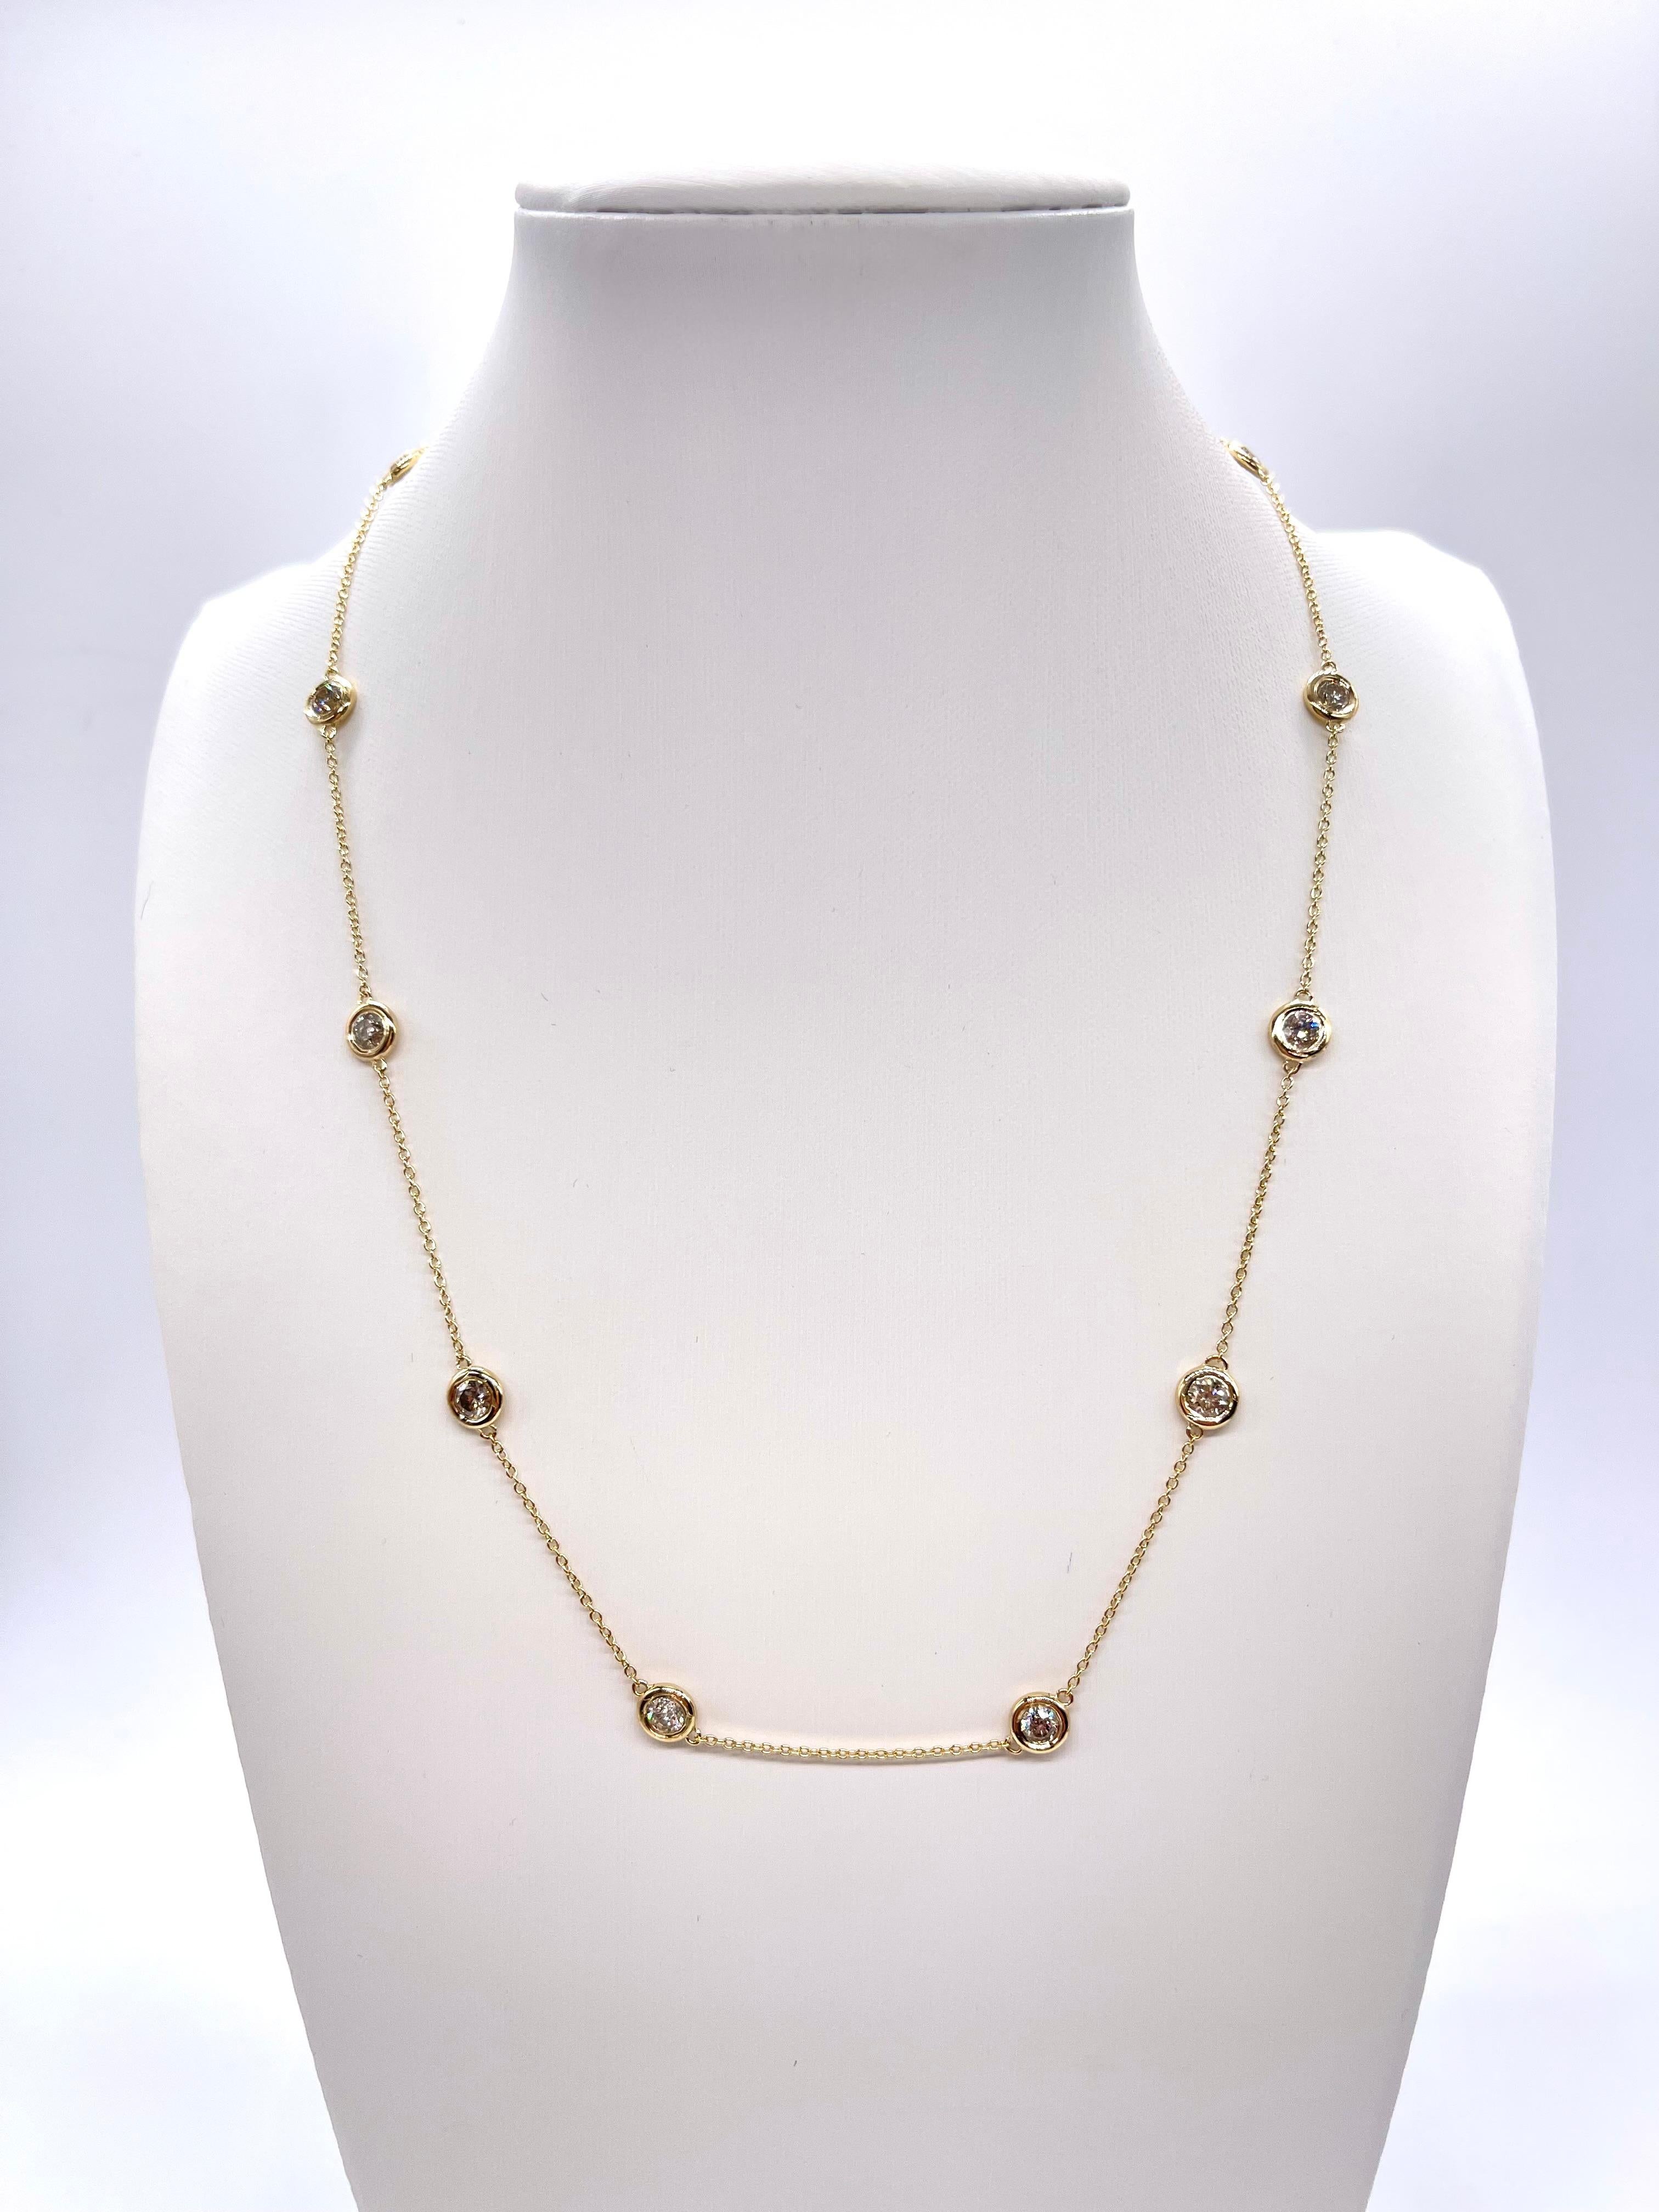 10 Station Diamond by the yard necklace set in Italian made 14K yellow gold. 
Total weight is 2.03 carats. Beautiful shiny stones. 
Length 16 inch 5.29 grams. Average K-,SI Natural Diamond

*Free shipping within U.S*